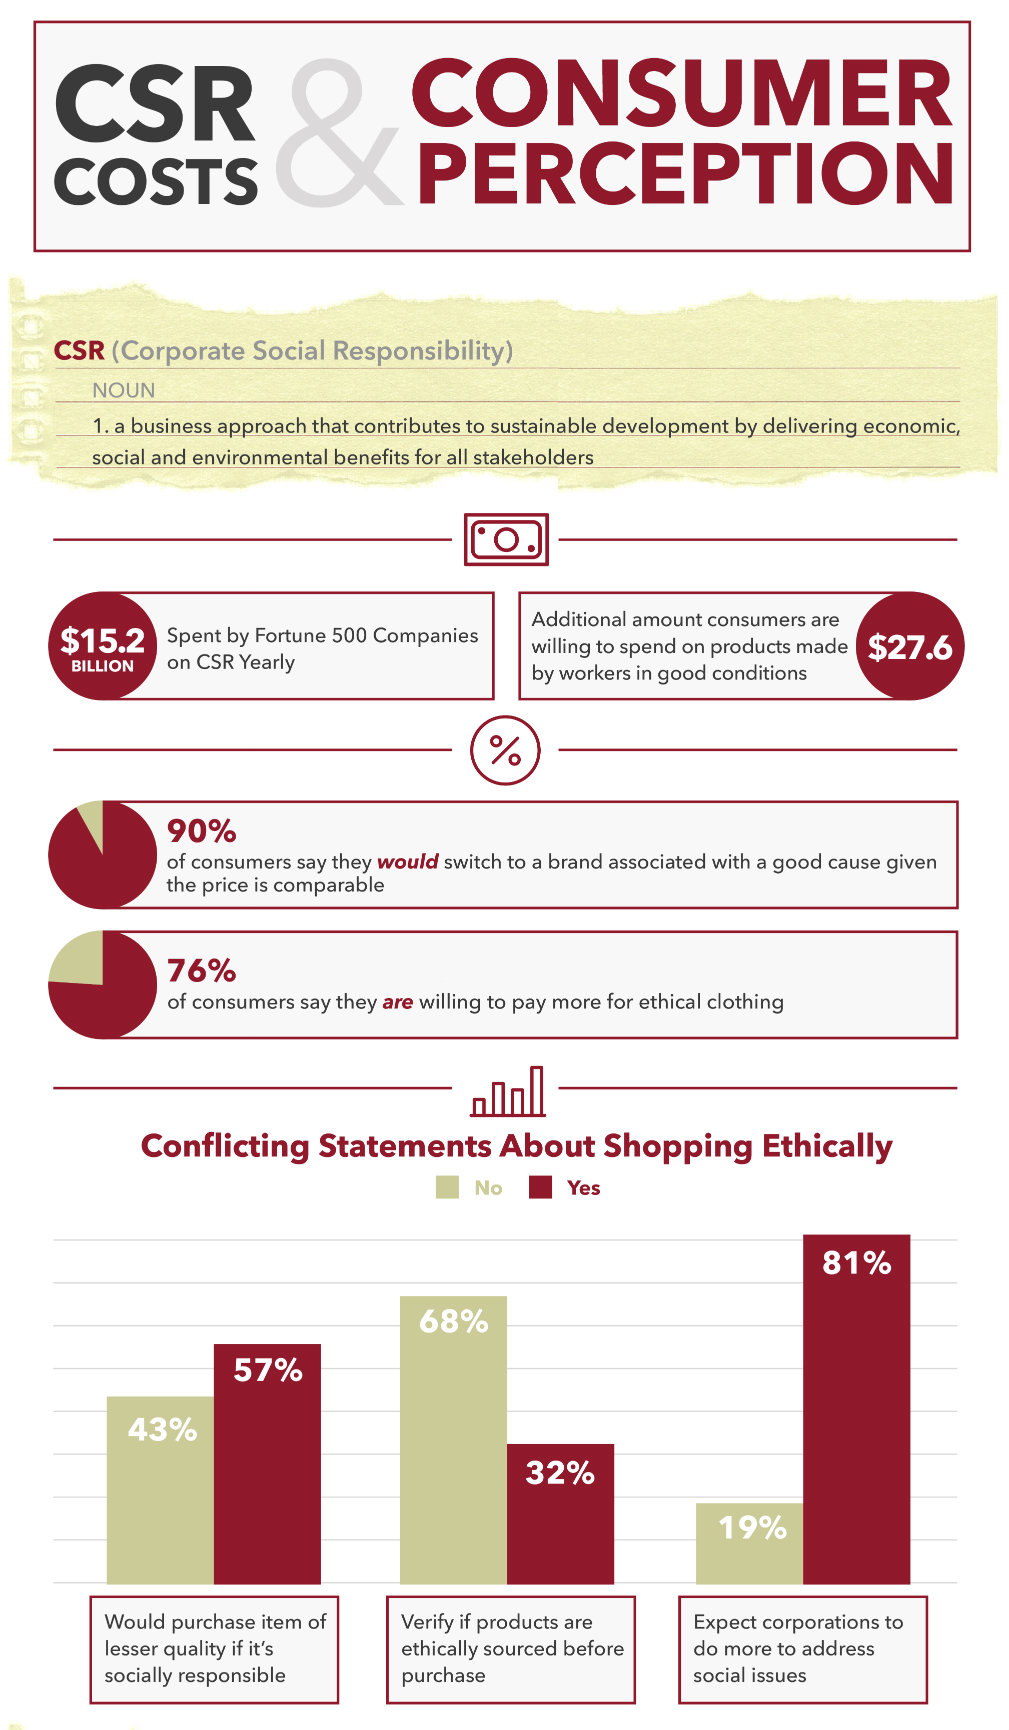 Corporate Social Responsibility and Consumer Perception